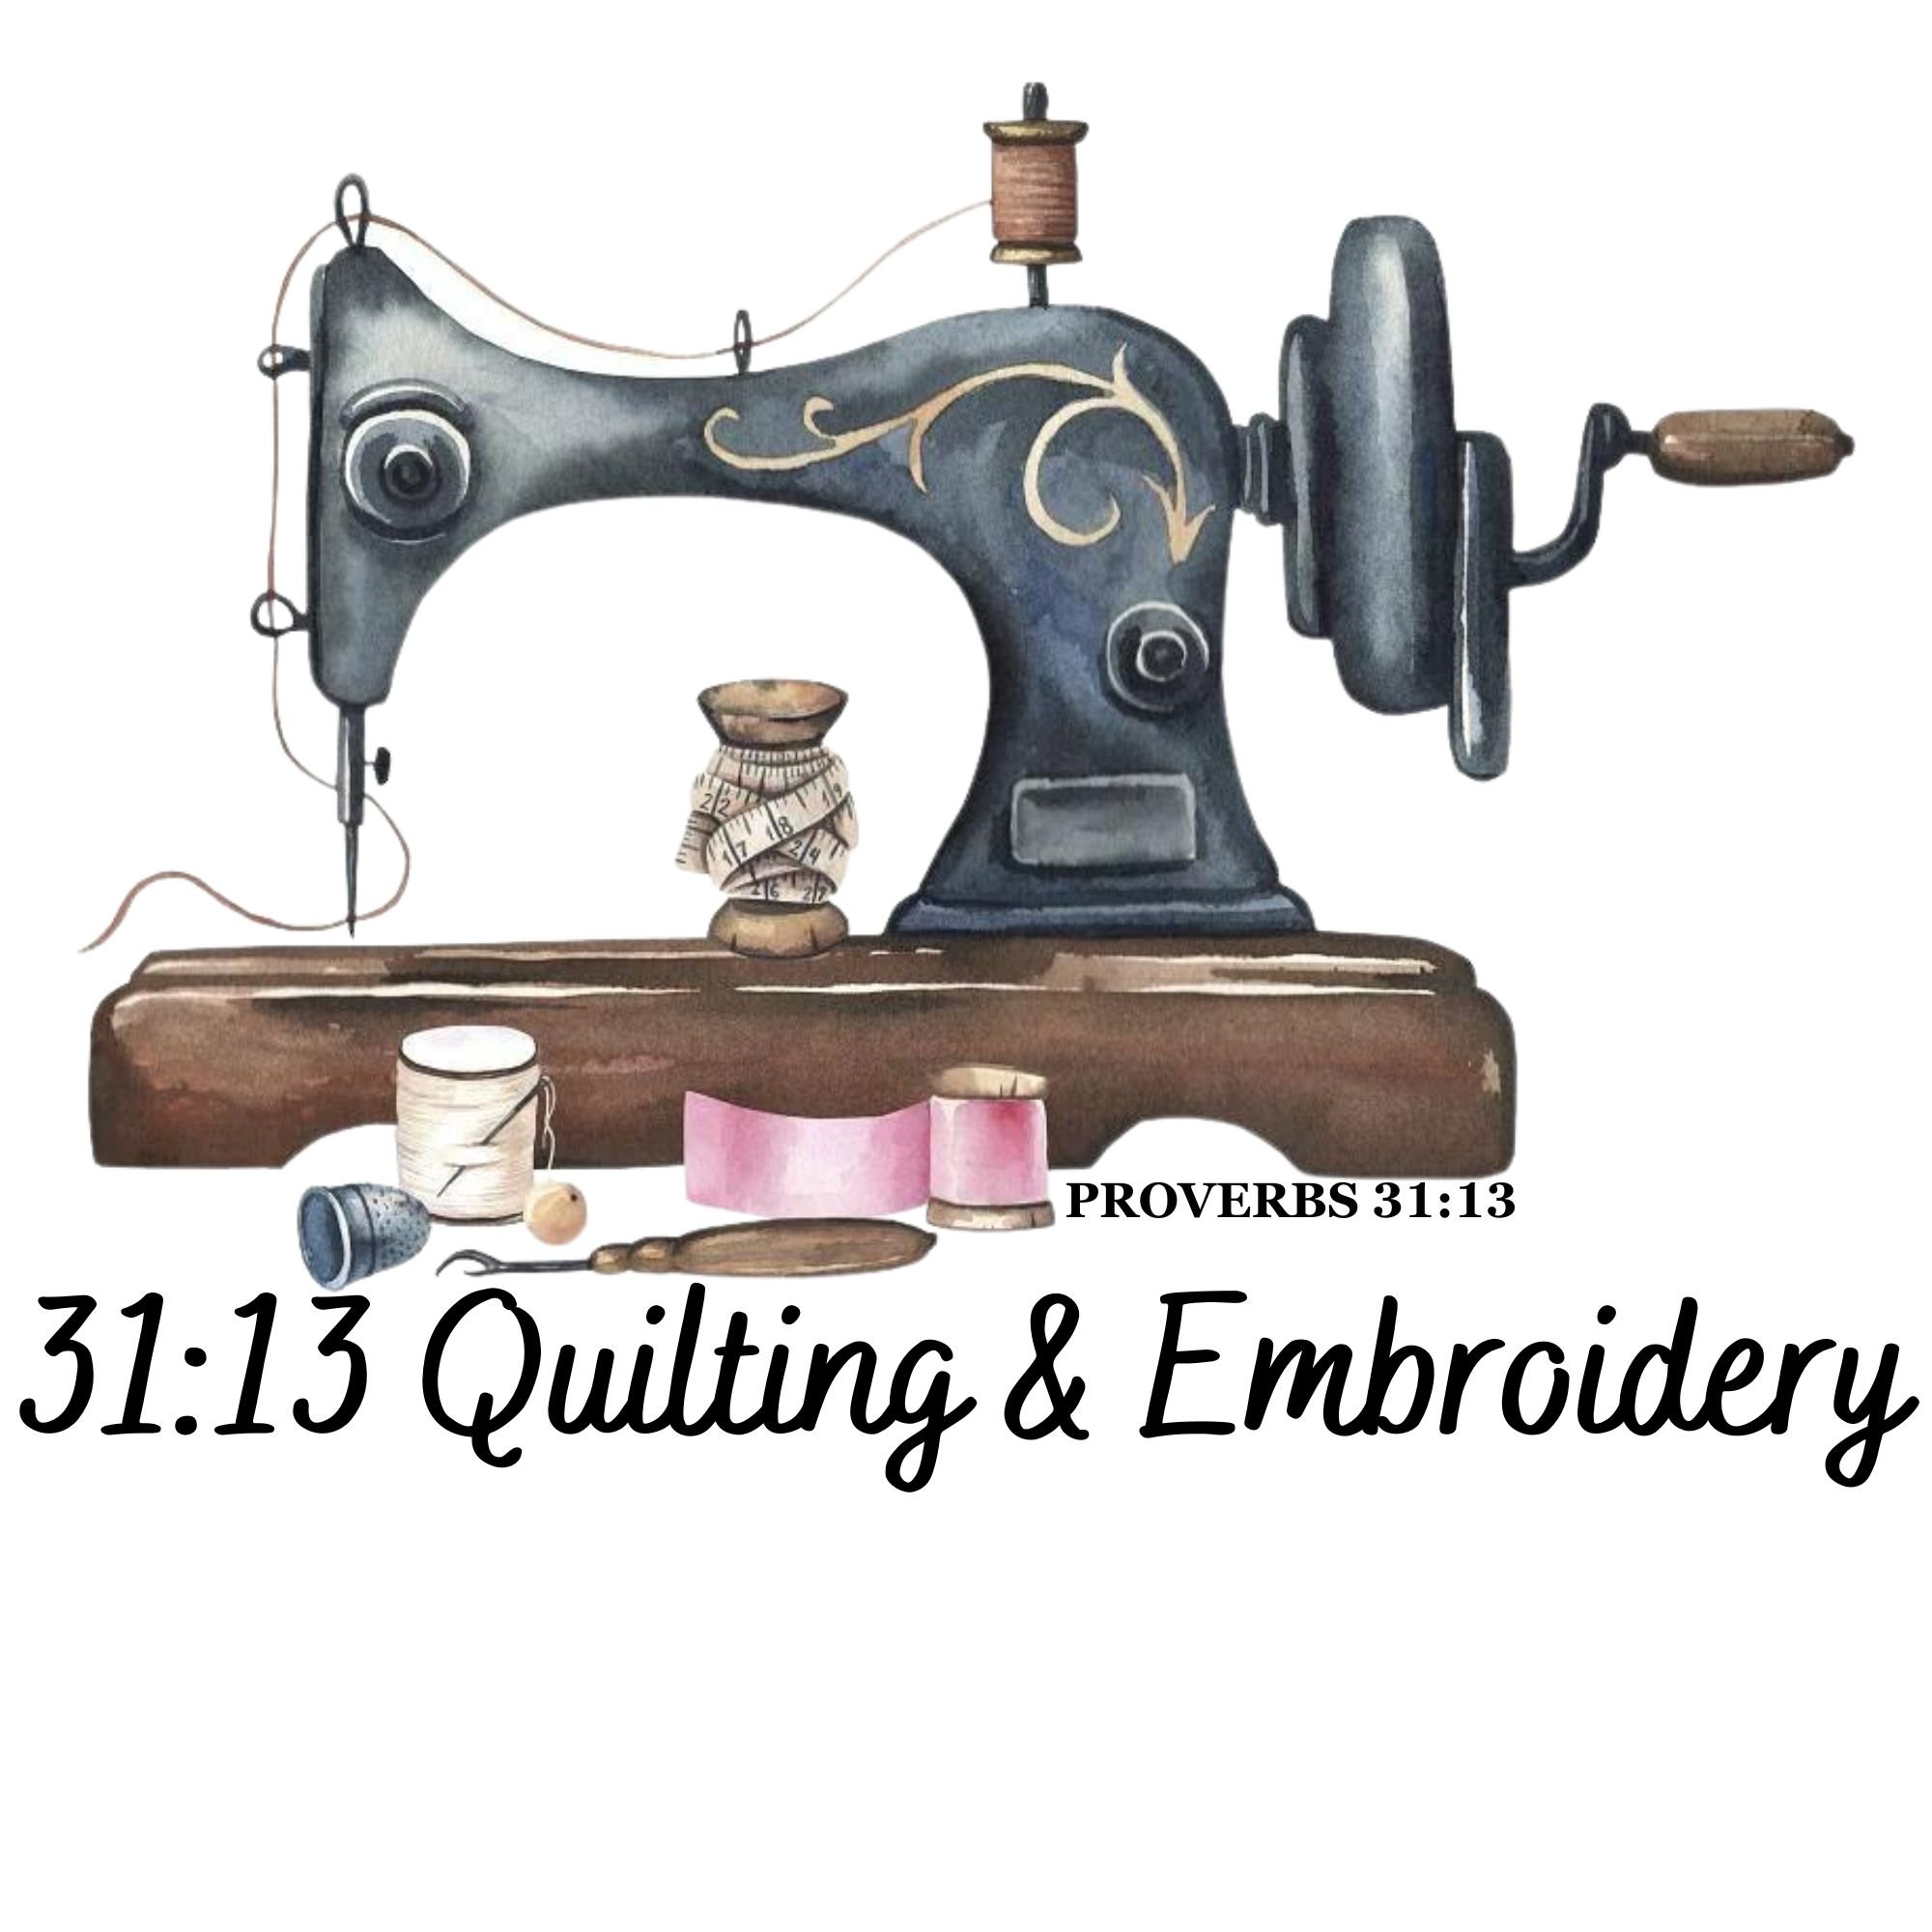 31:13 Quilting & Embroidery Live Event